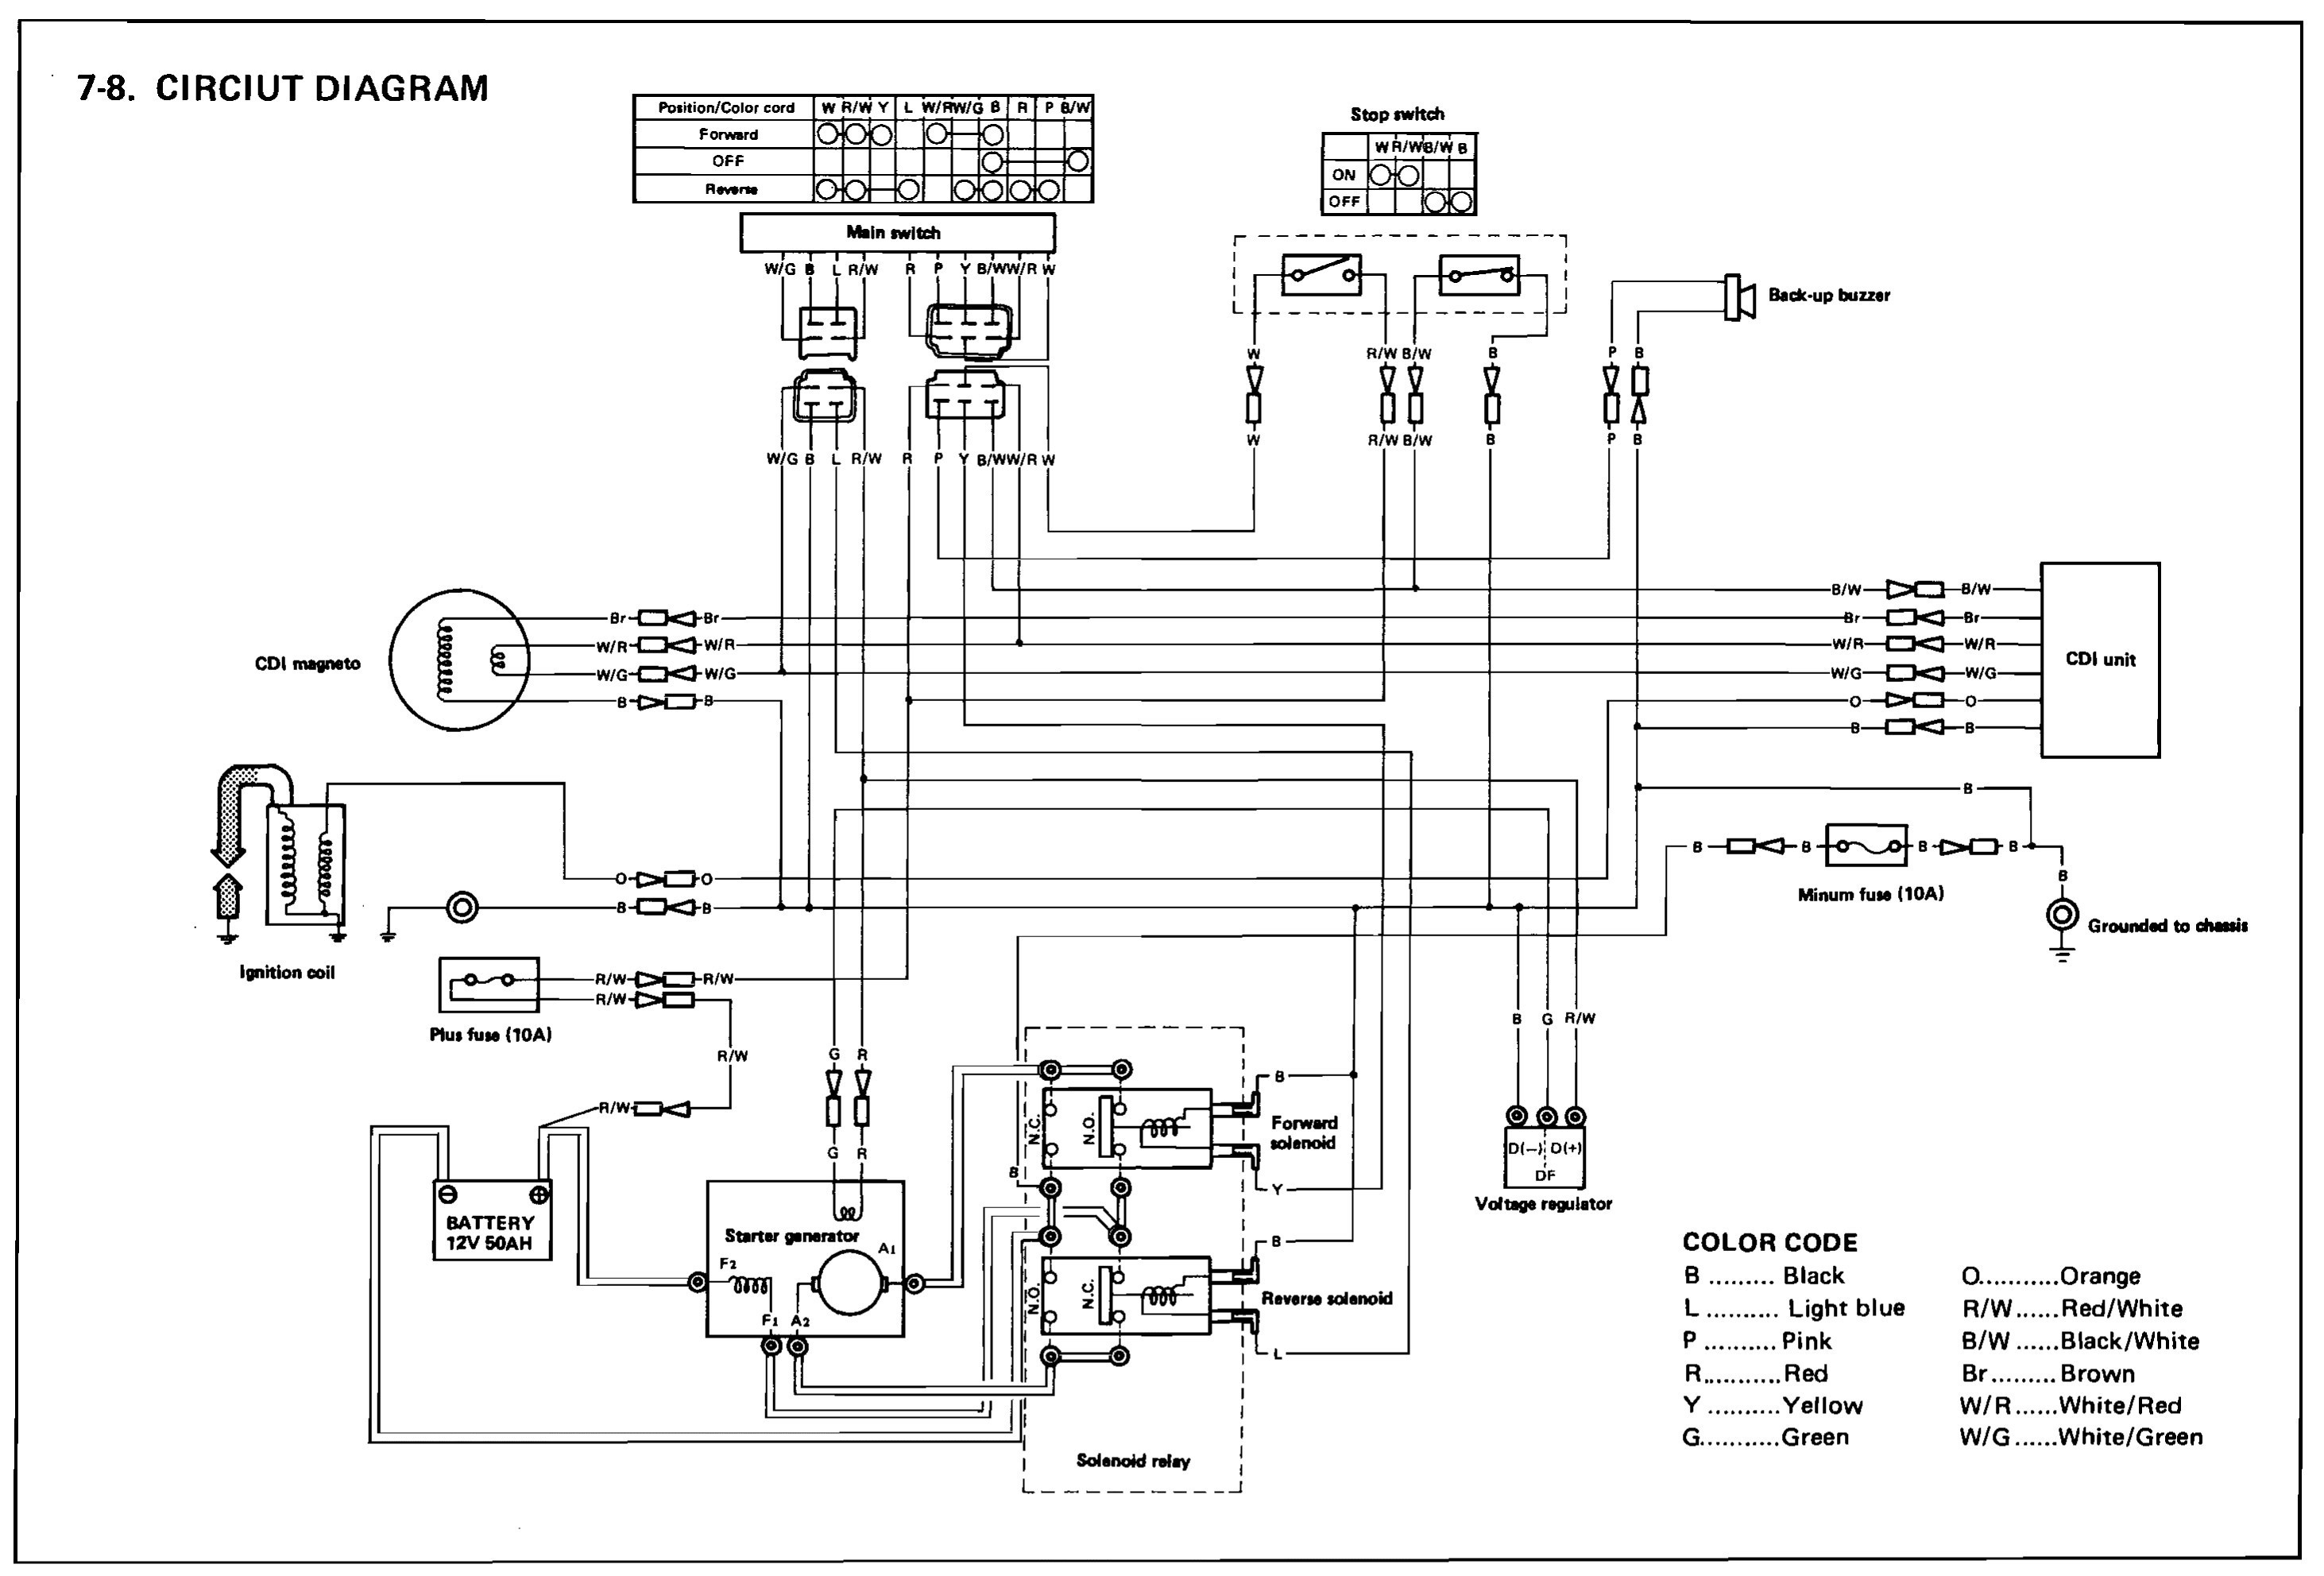 Remote Starter Wiring Diagrams Ipphil Page 19 Of 23 Diagram Sample and Wiring Diagrams Free Of Remote Starter Wiring Diagrams